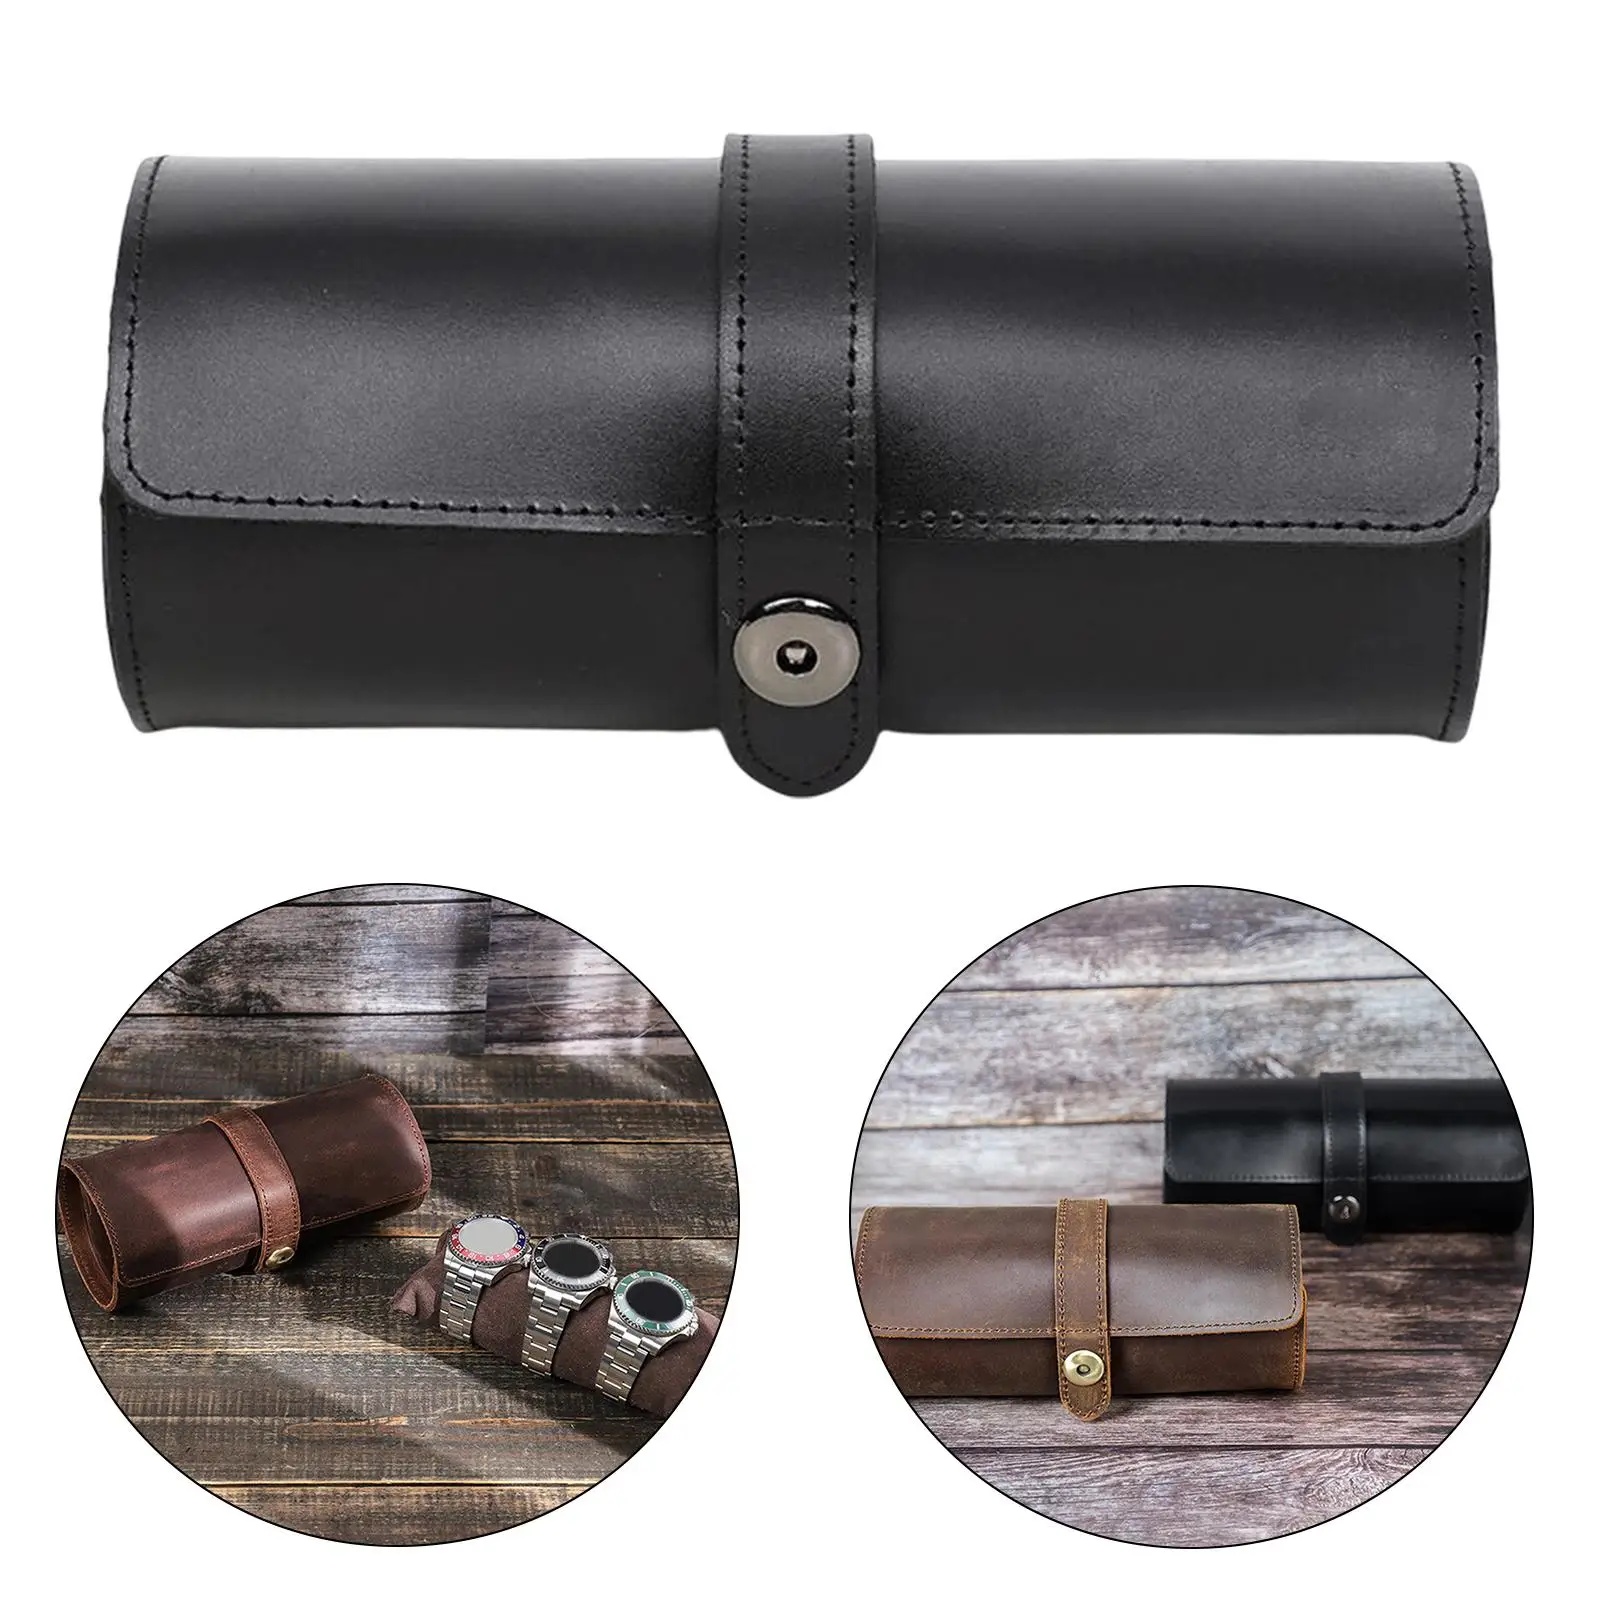 Watch Roll Travel Case PU Leather Jewelry Case Watch Holder Box Wrist Watch Container